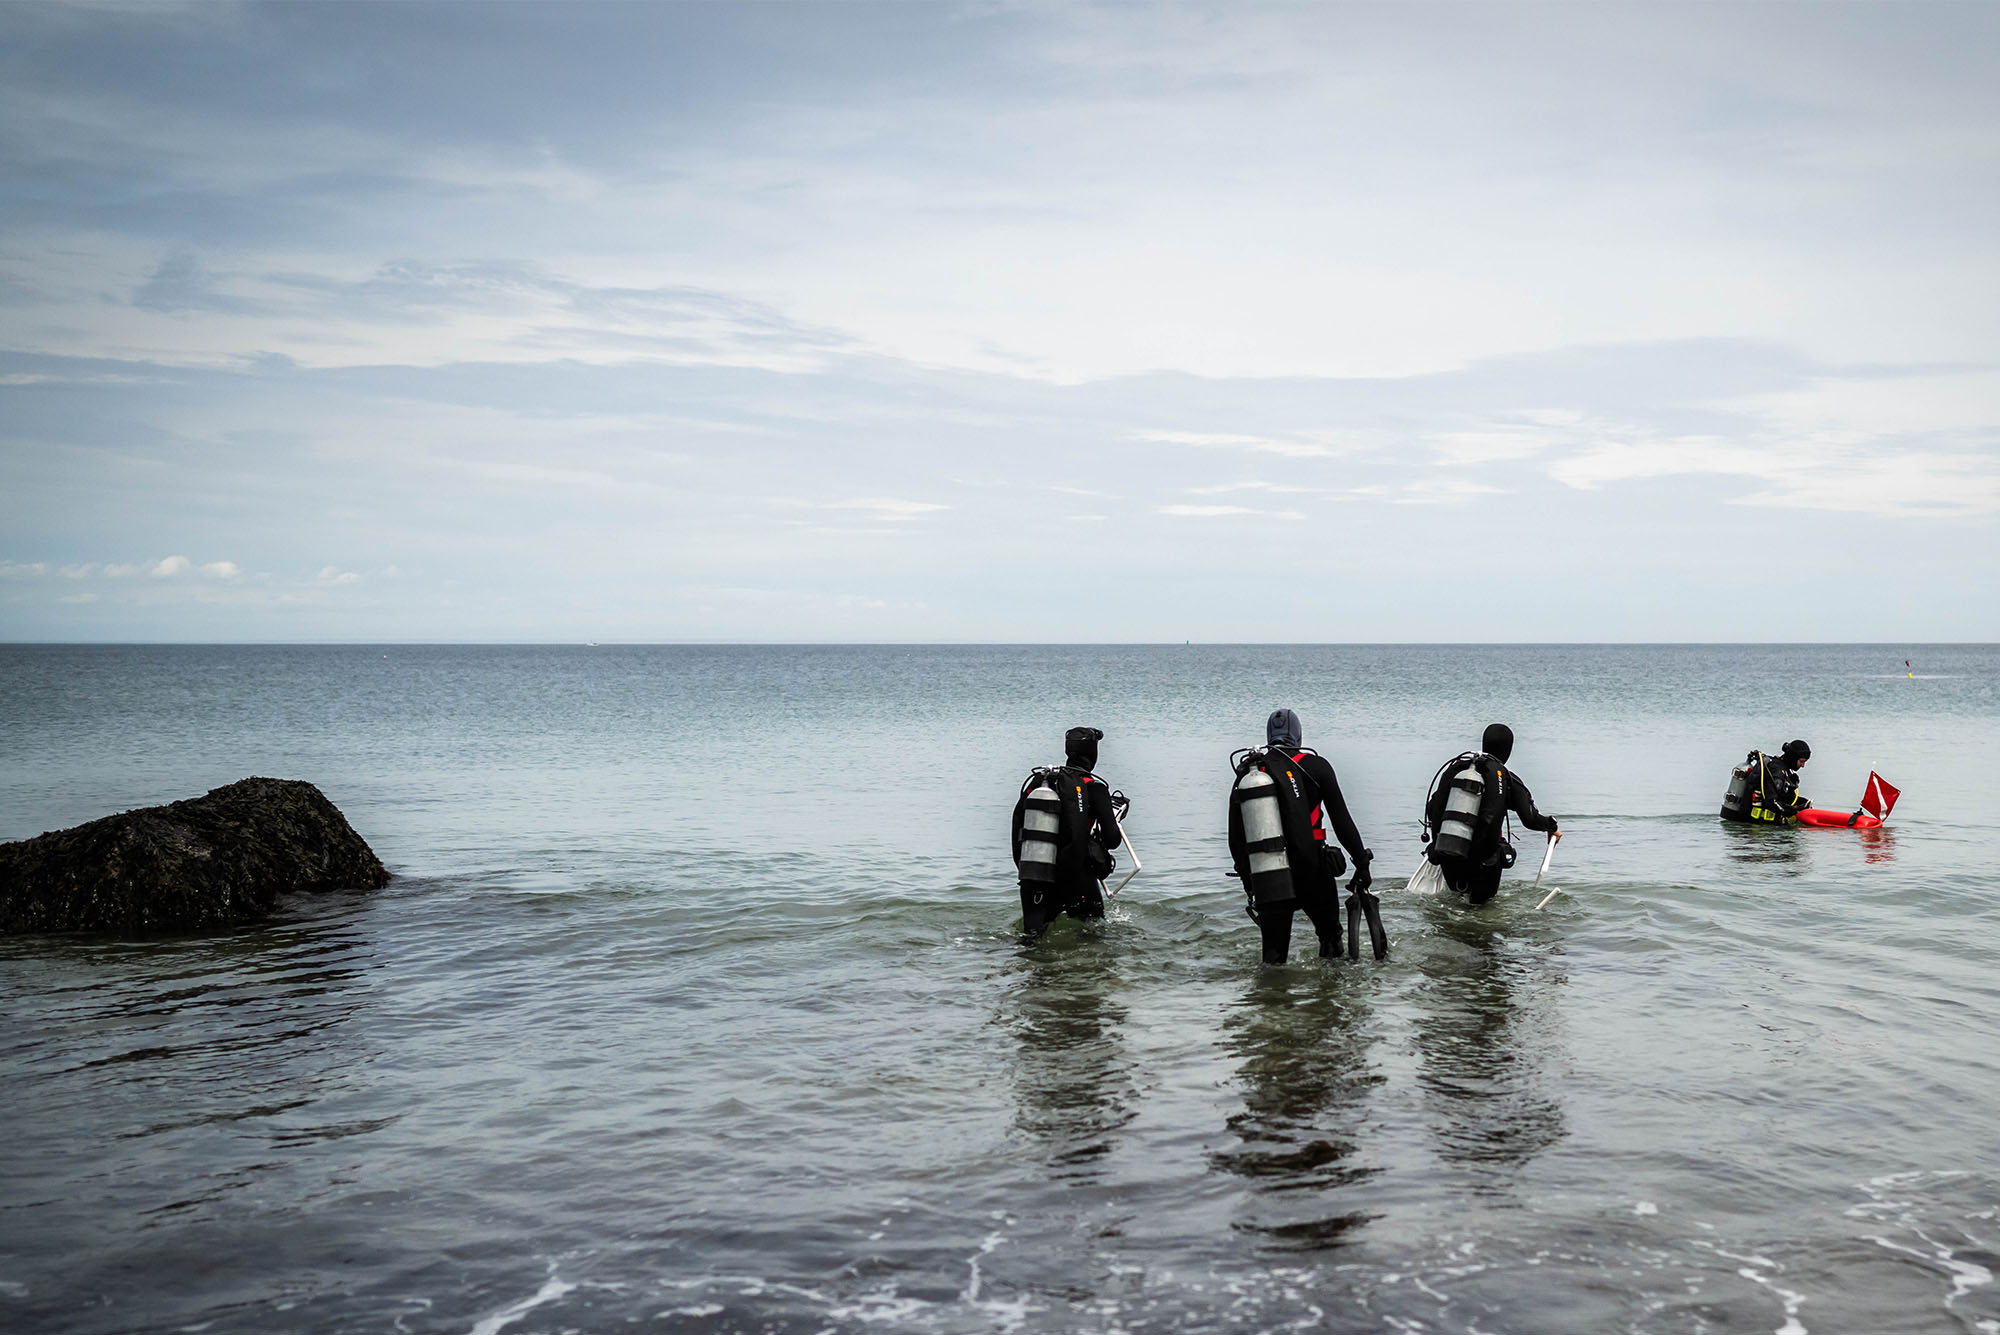 Photo: A group of divers in scuba gear wade out into the ocean on a cloudy day in Rockport, Massachusetts